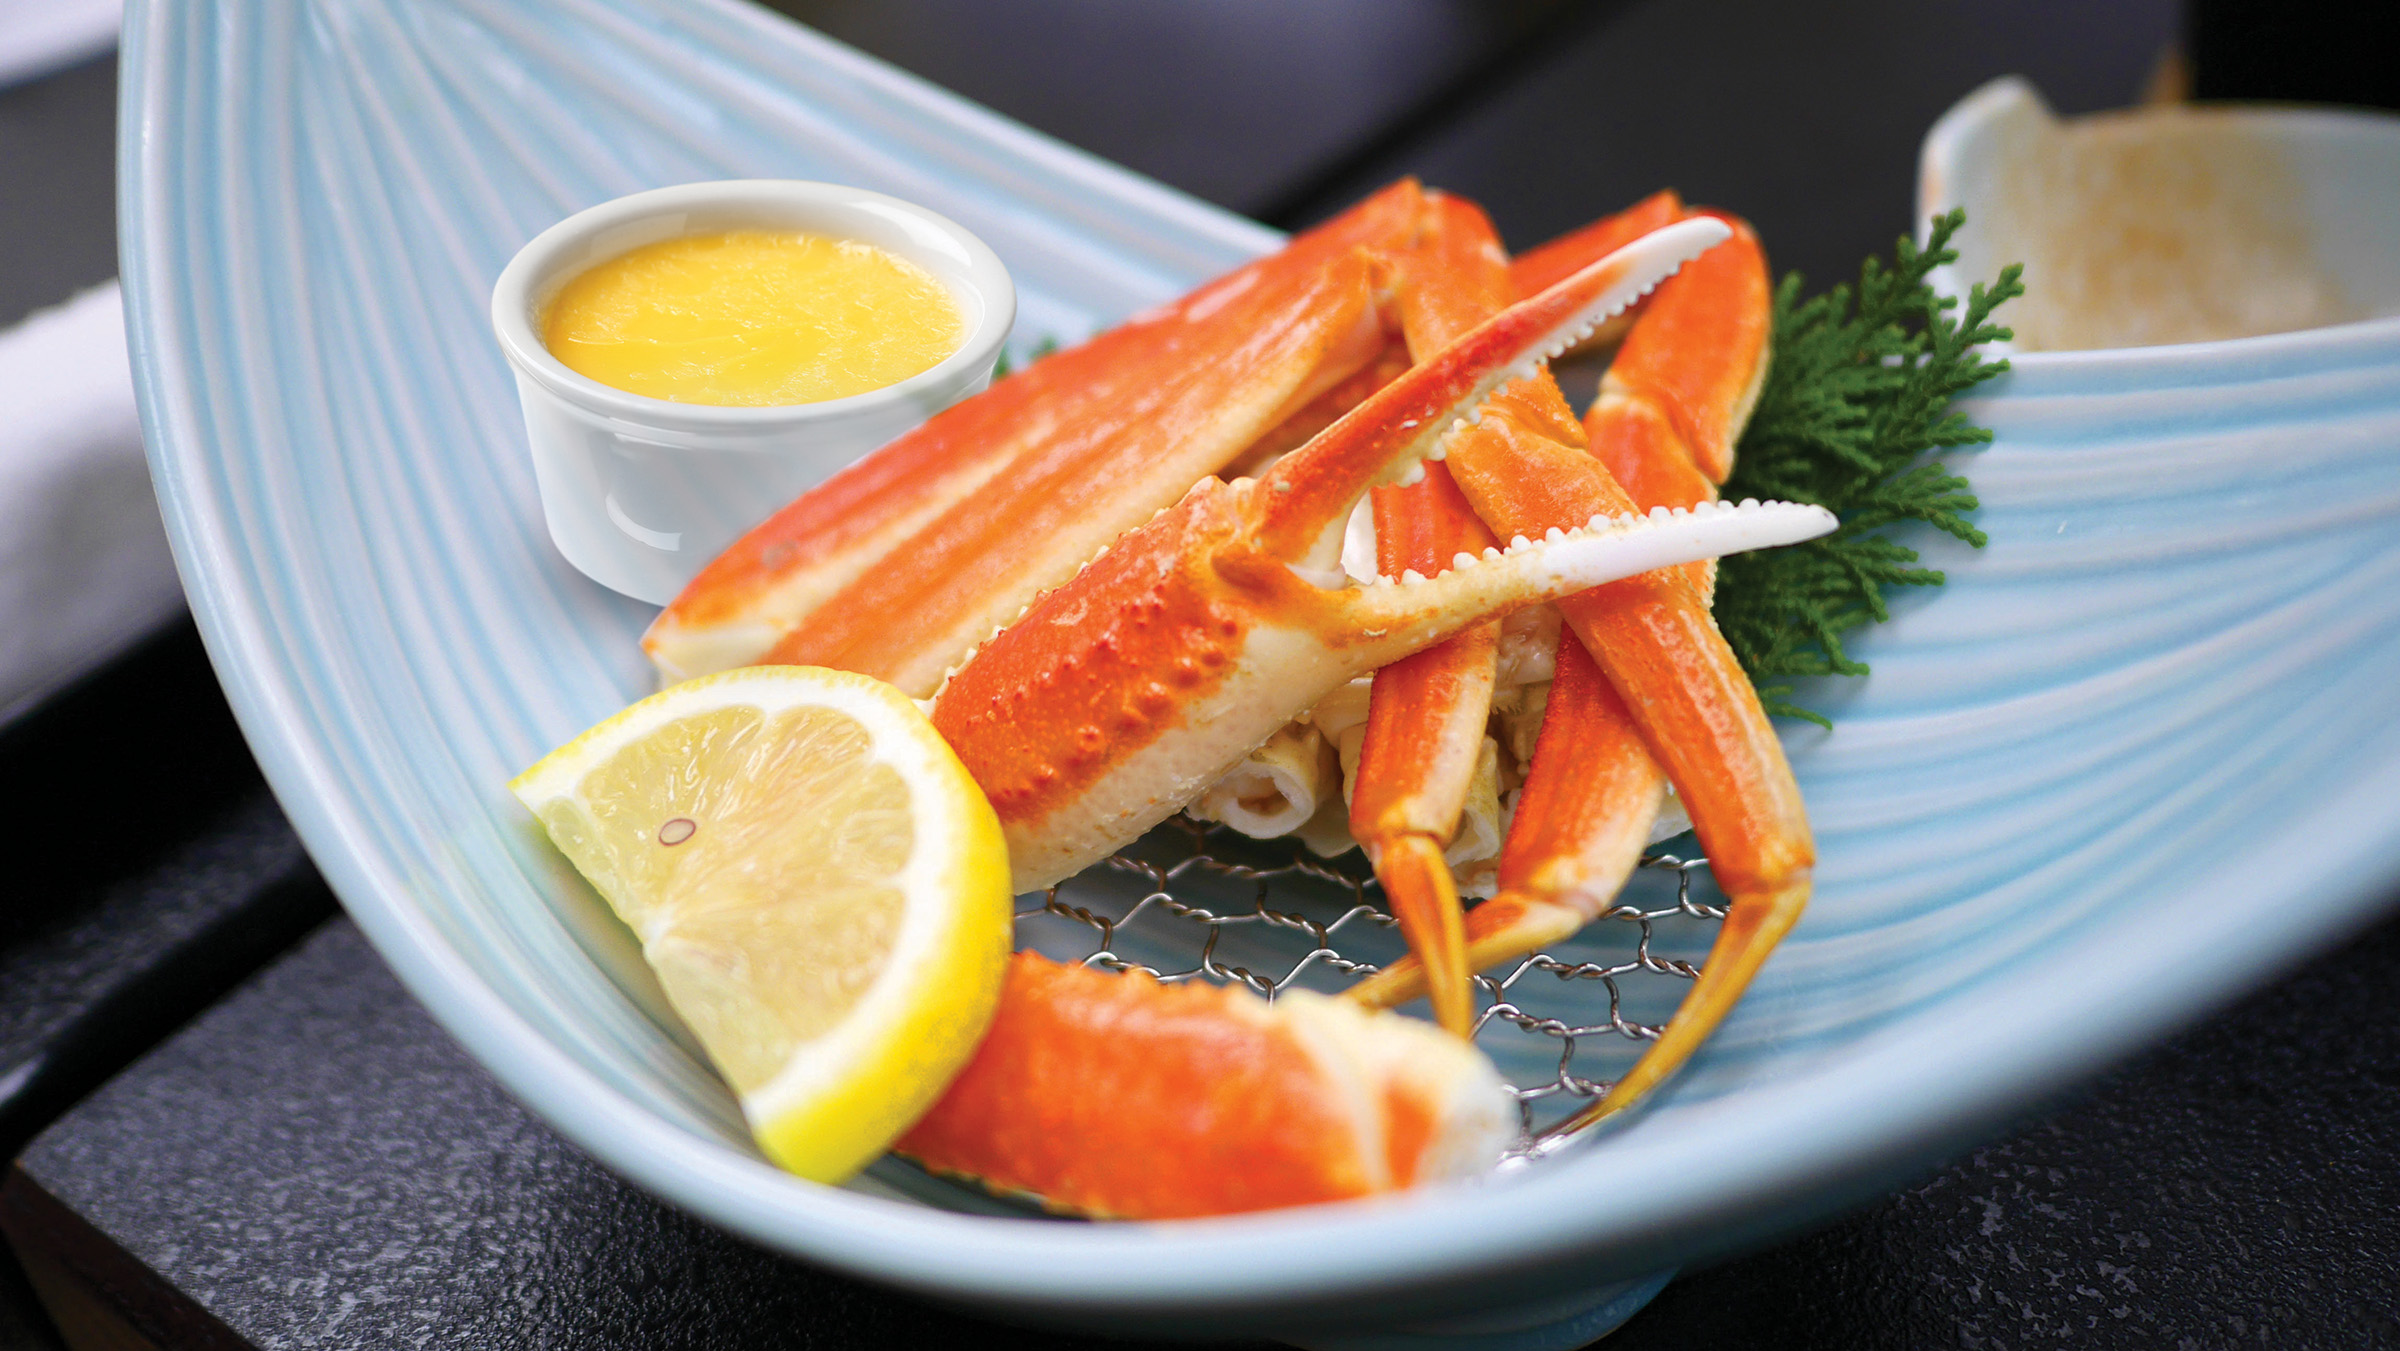 Best Lobster and Seafood Buffet in San Diego | Valley View Casino